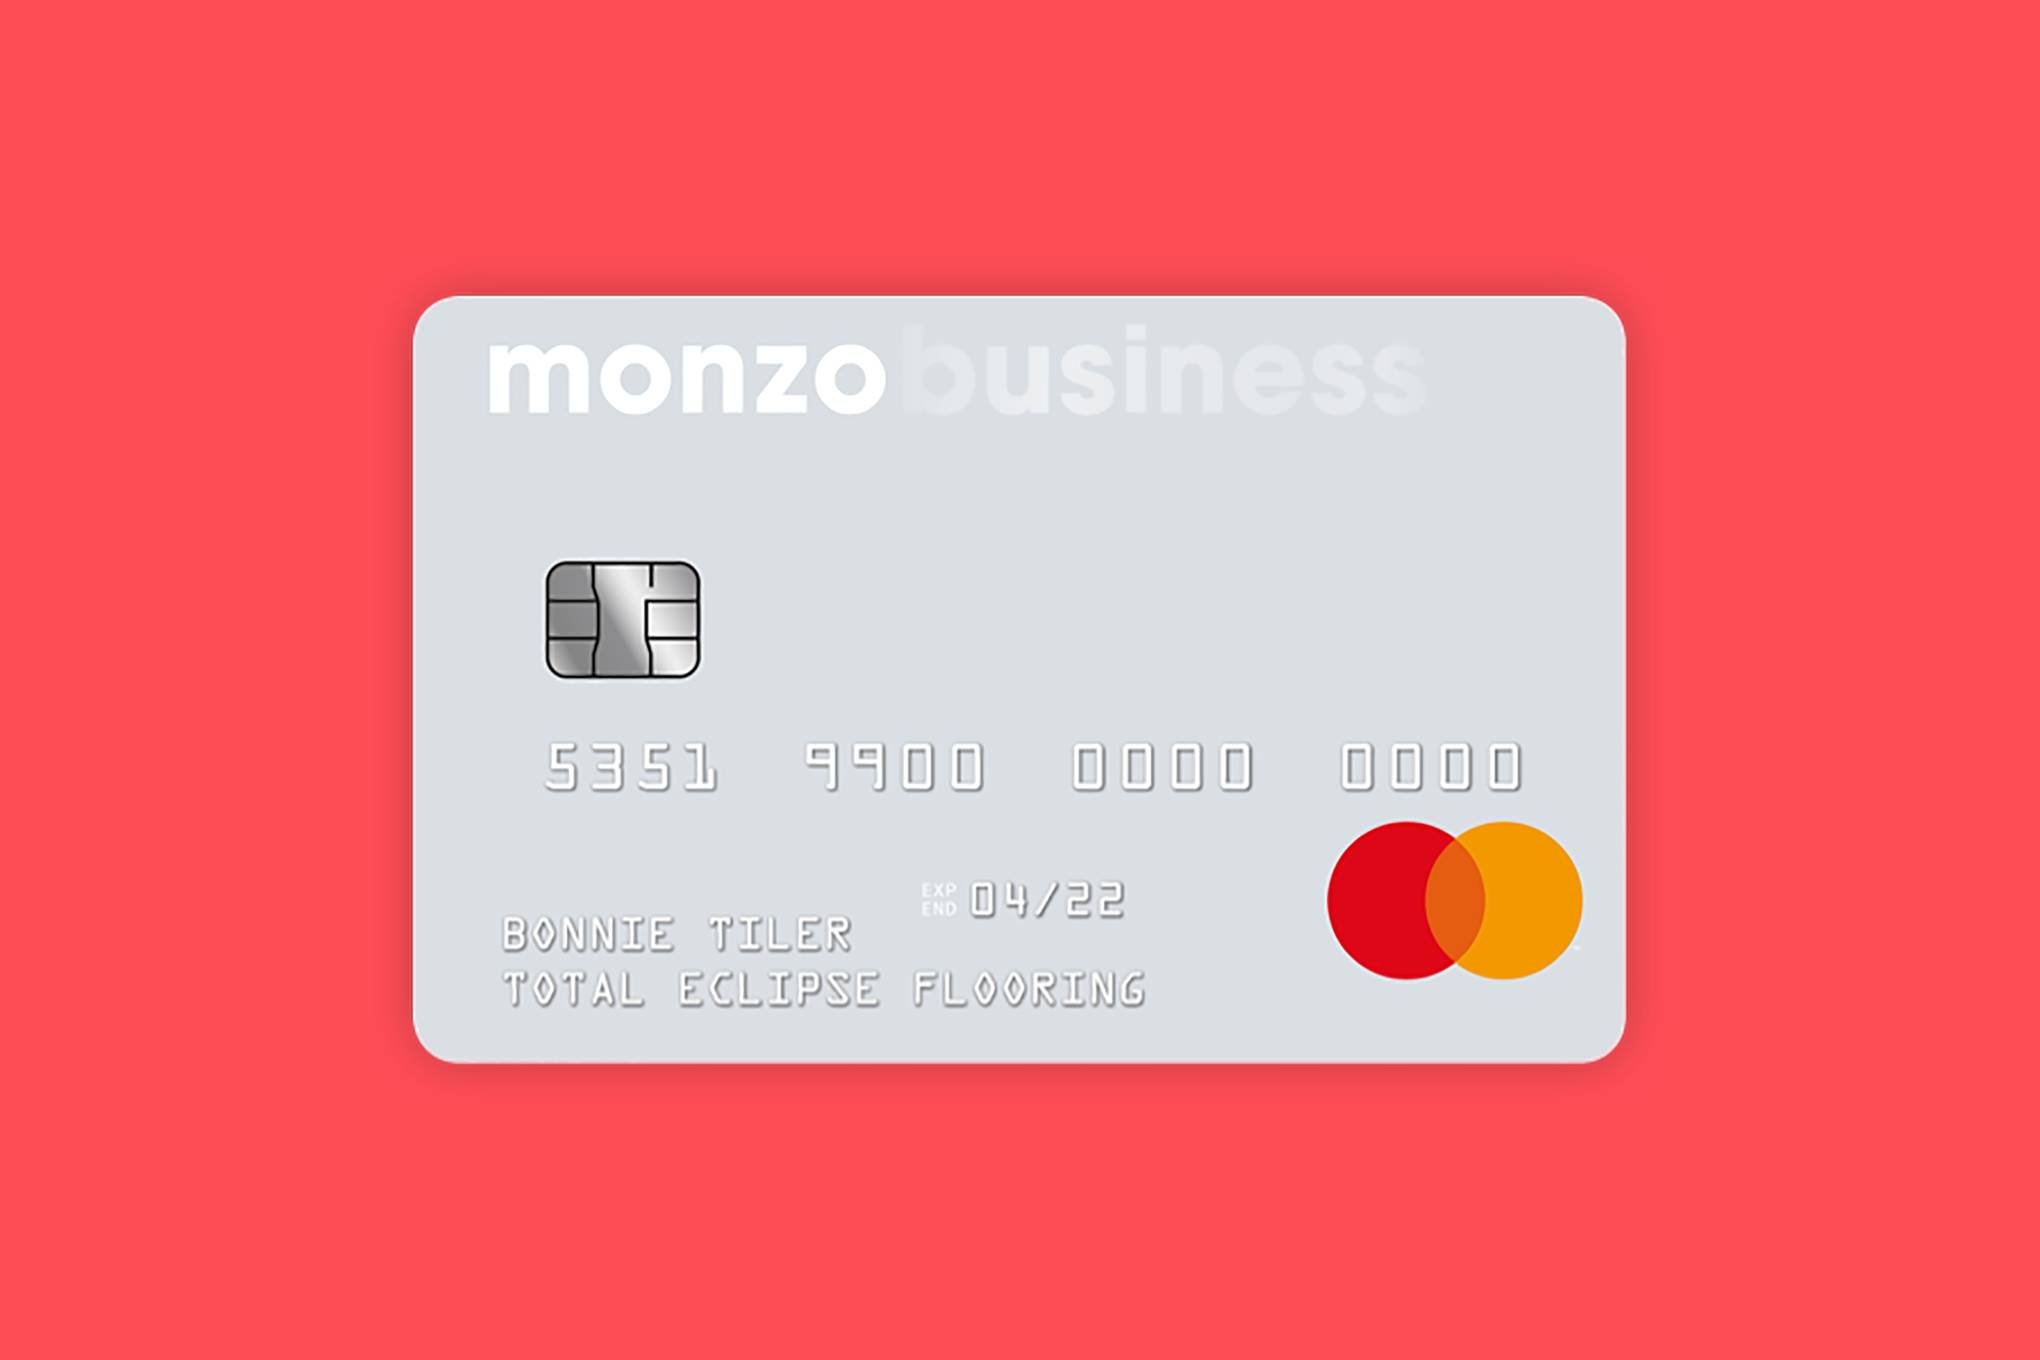 monzo's next big move is taking on broken business banking